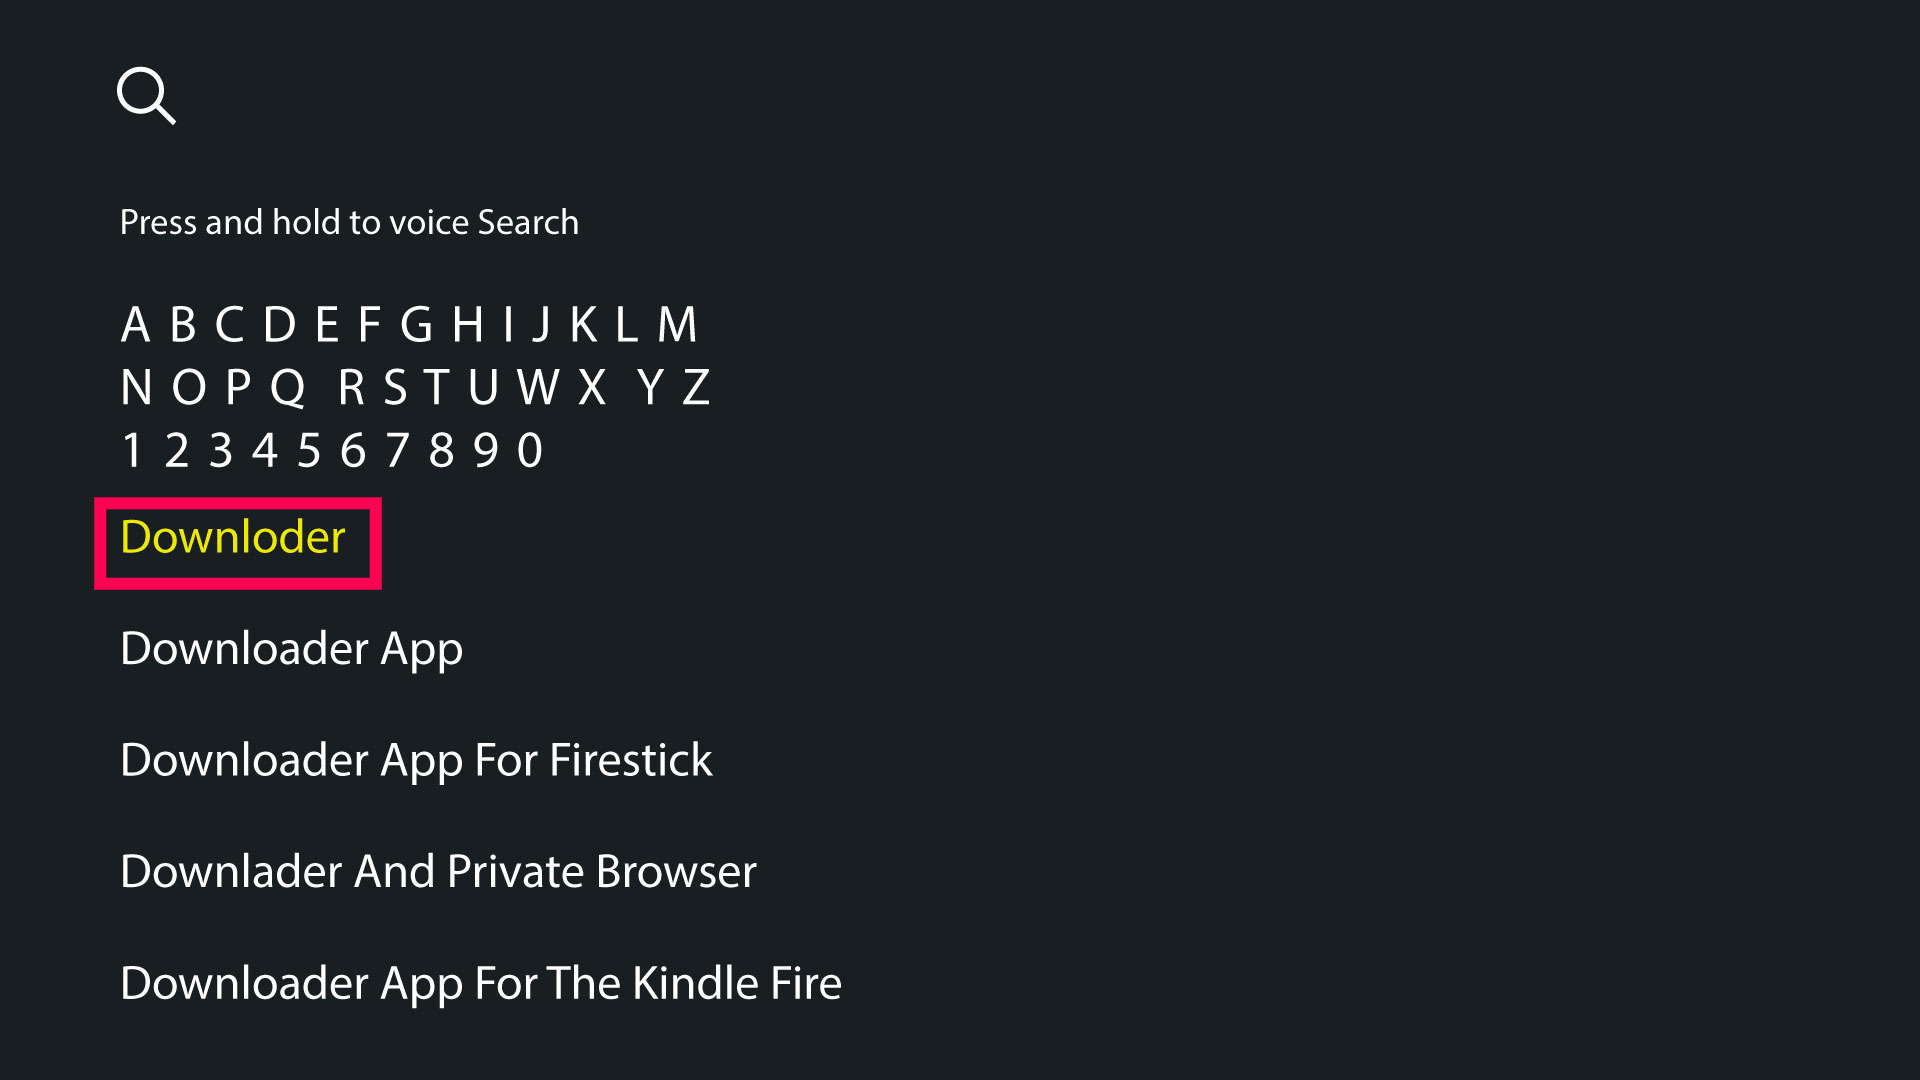 Search Option on Firestick